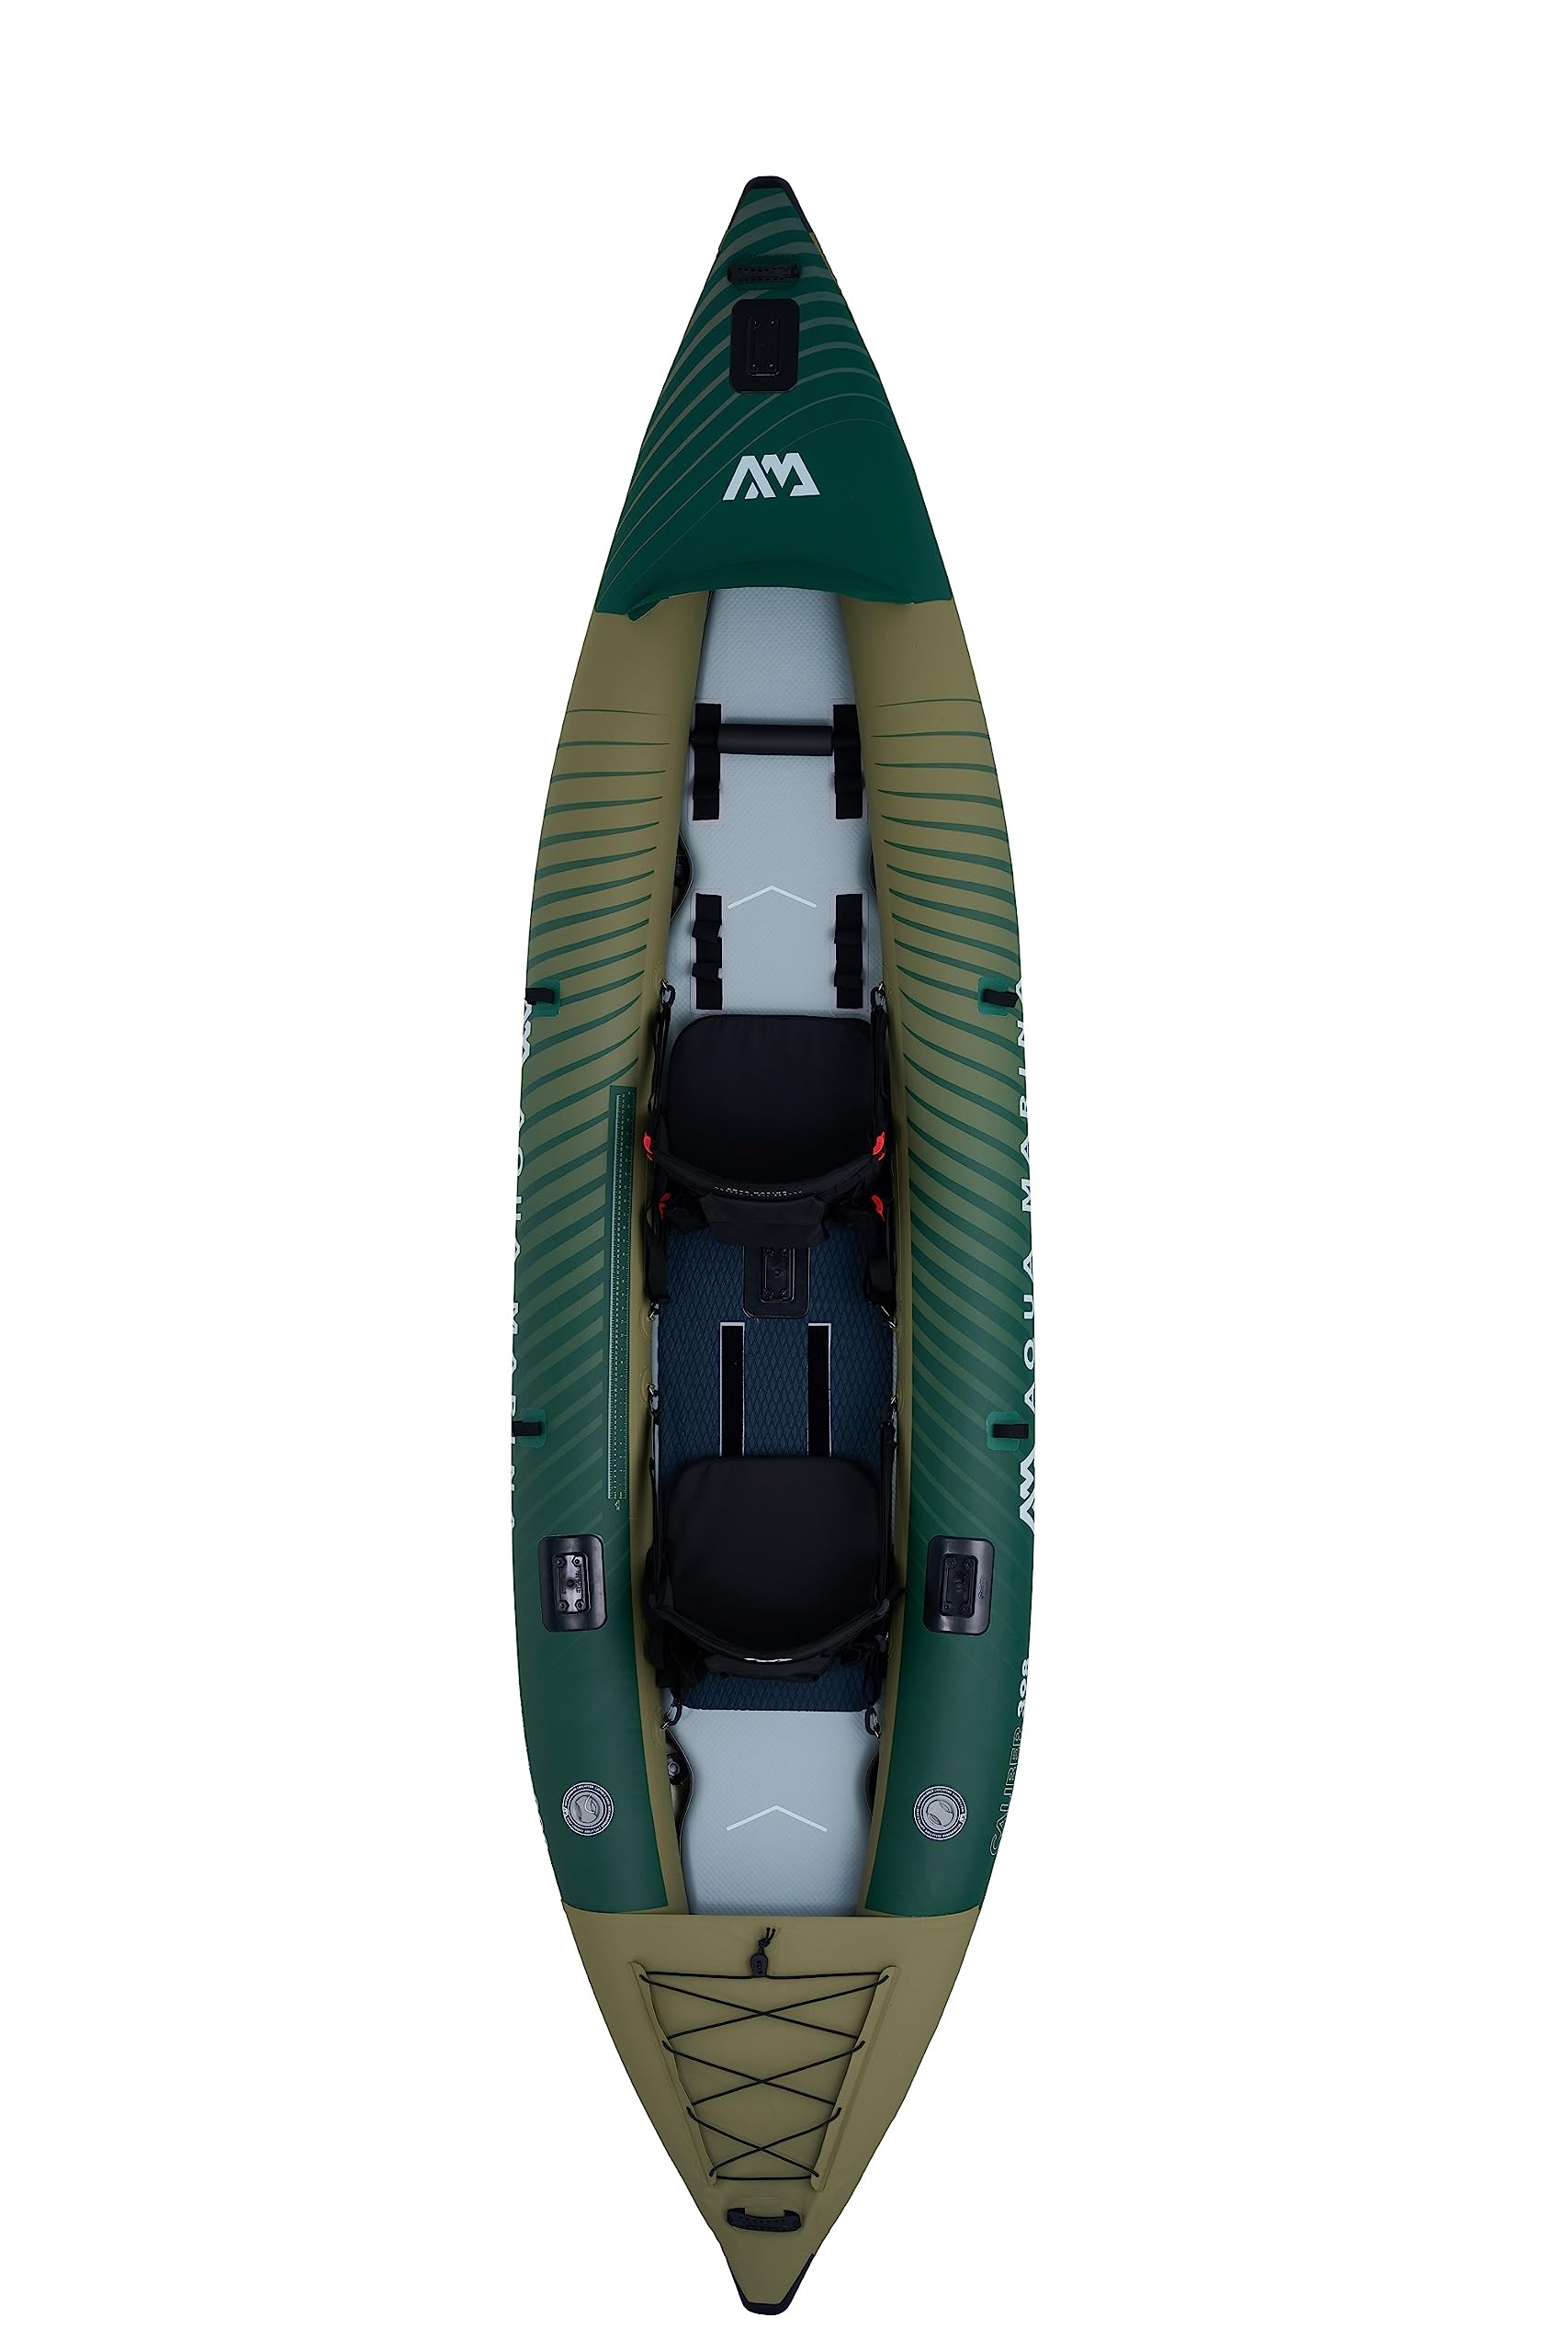 Aqua Marina Caliber Angling Inflatable Kayak 1 or 2-Person 13'1". Reinforced PVC Deck. Foldable Fishing seat x1, Cup Holder. (Paddle Excluded)